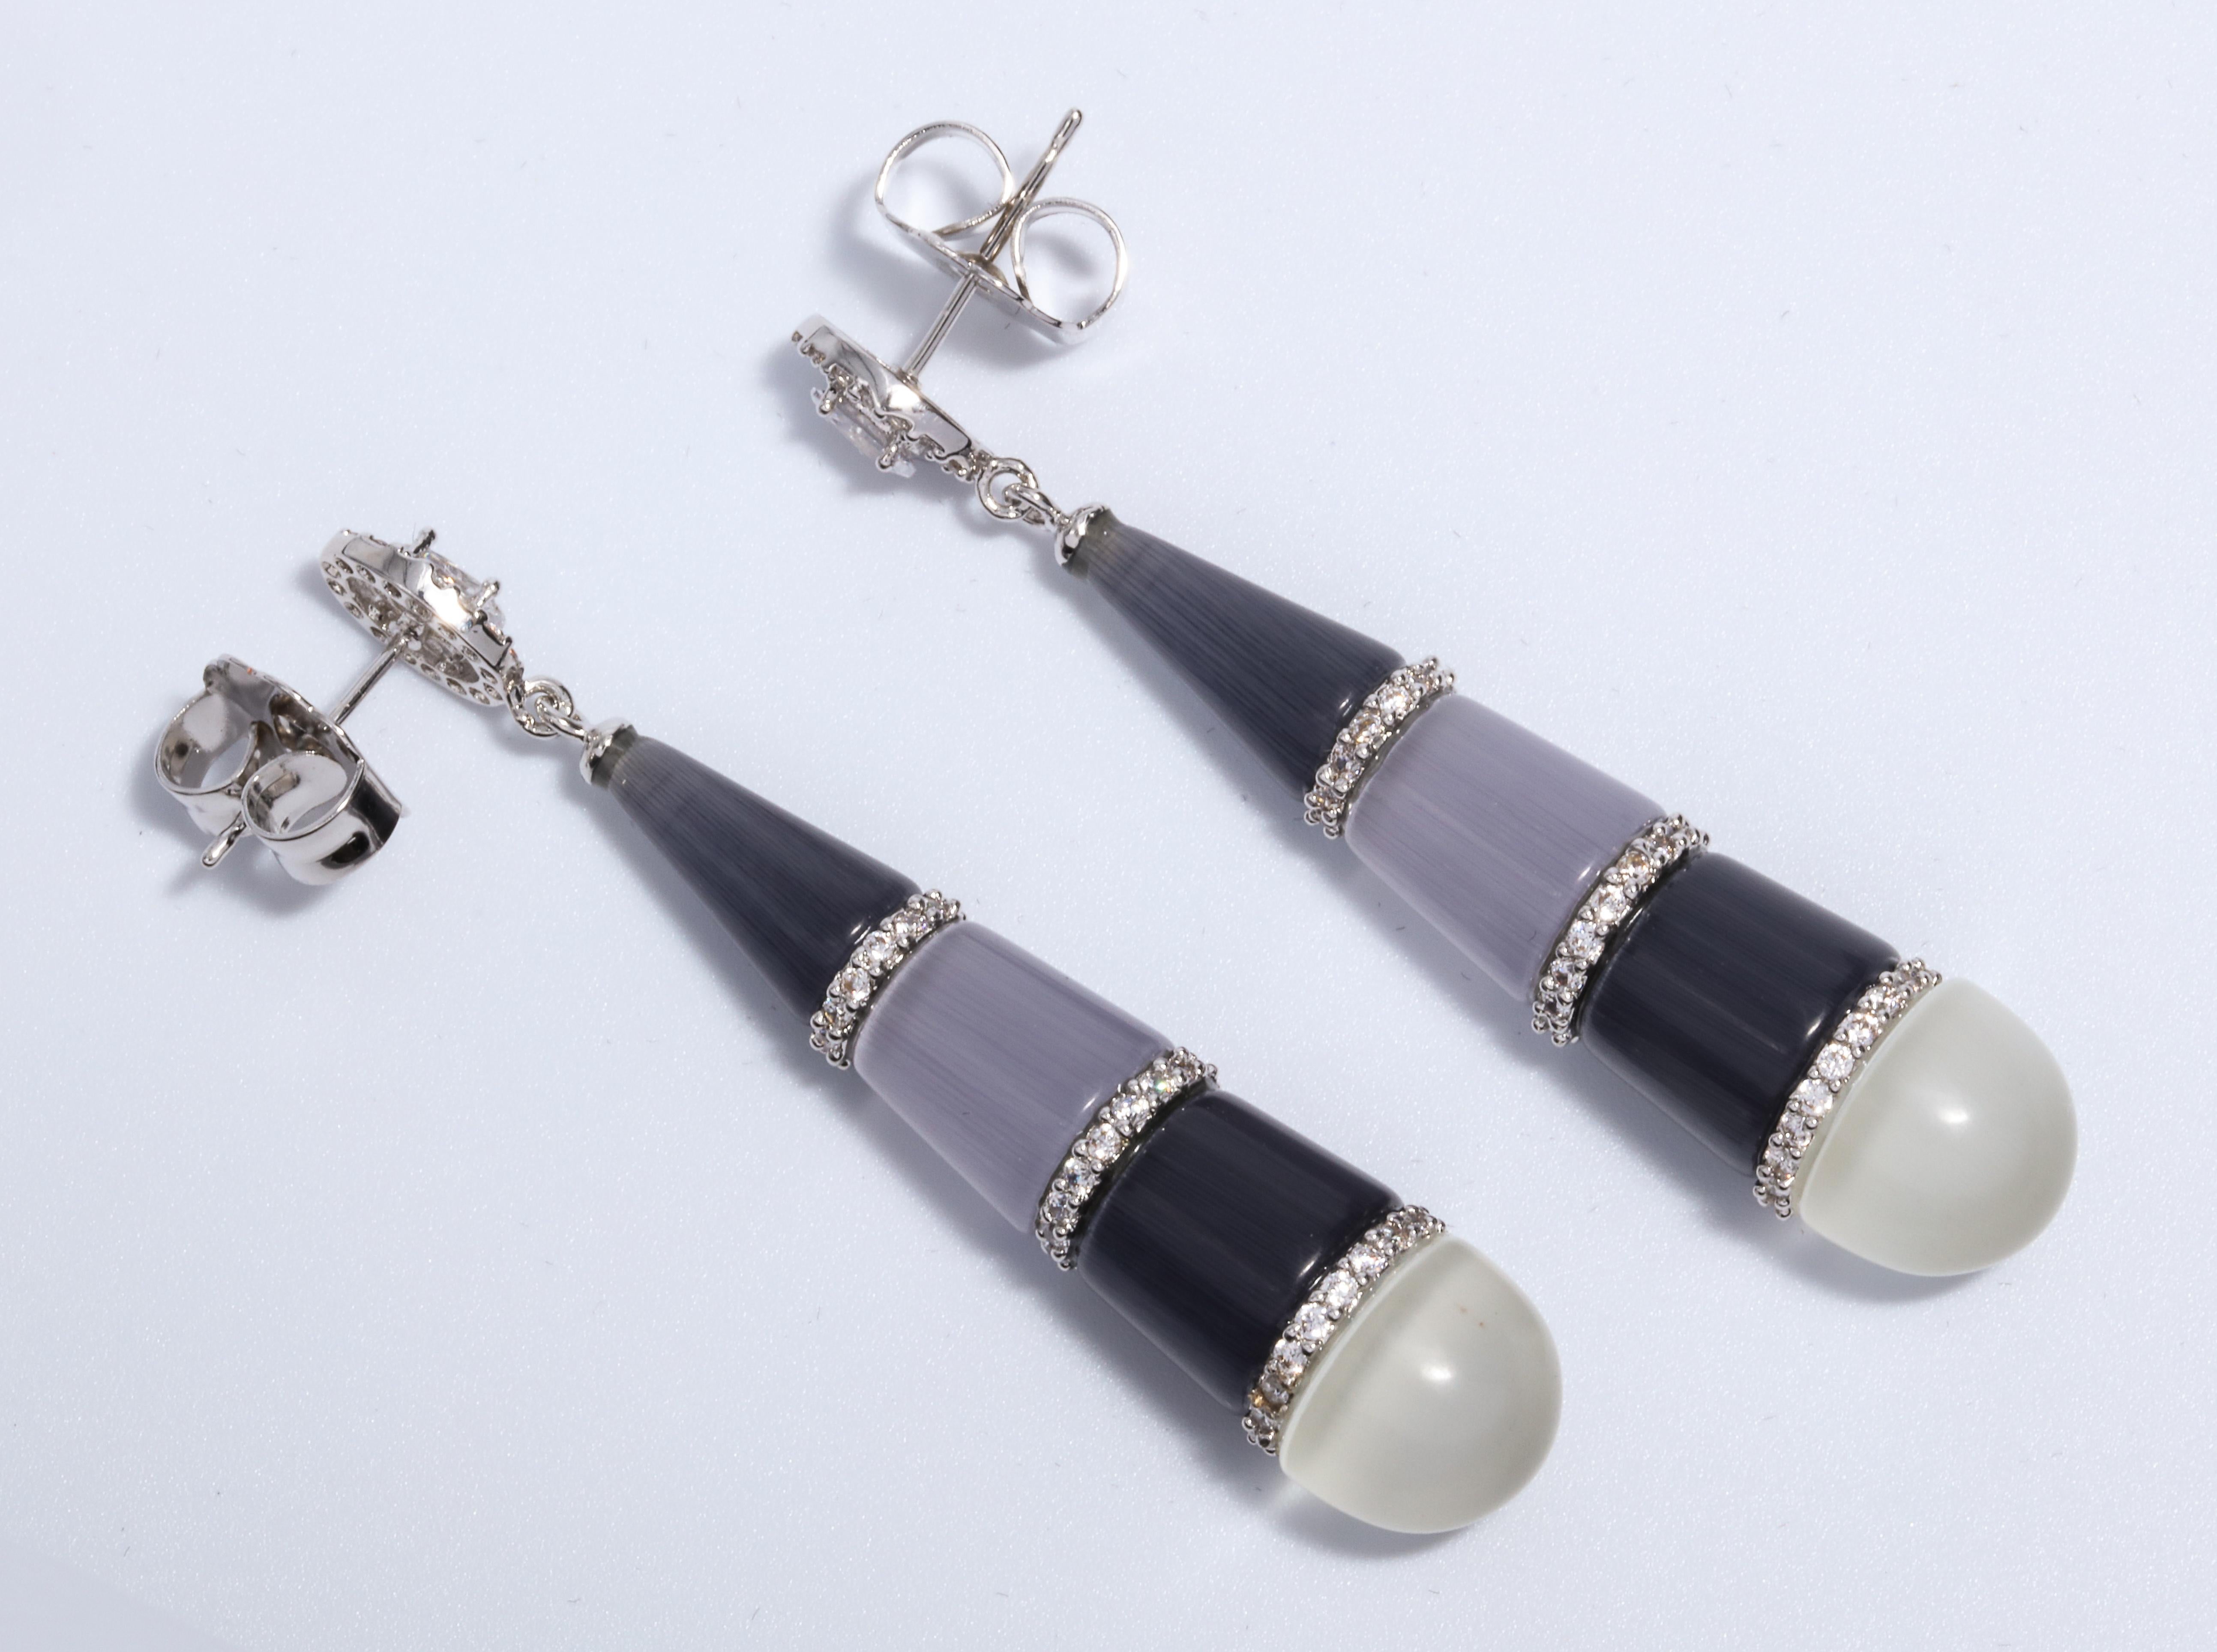 Magnificent Costume Jewelry Art Deco Style Faux Onyx Diamond Moonstone Drop Earrings Post set with CZ  2 1/4inches long